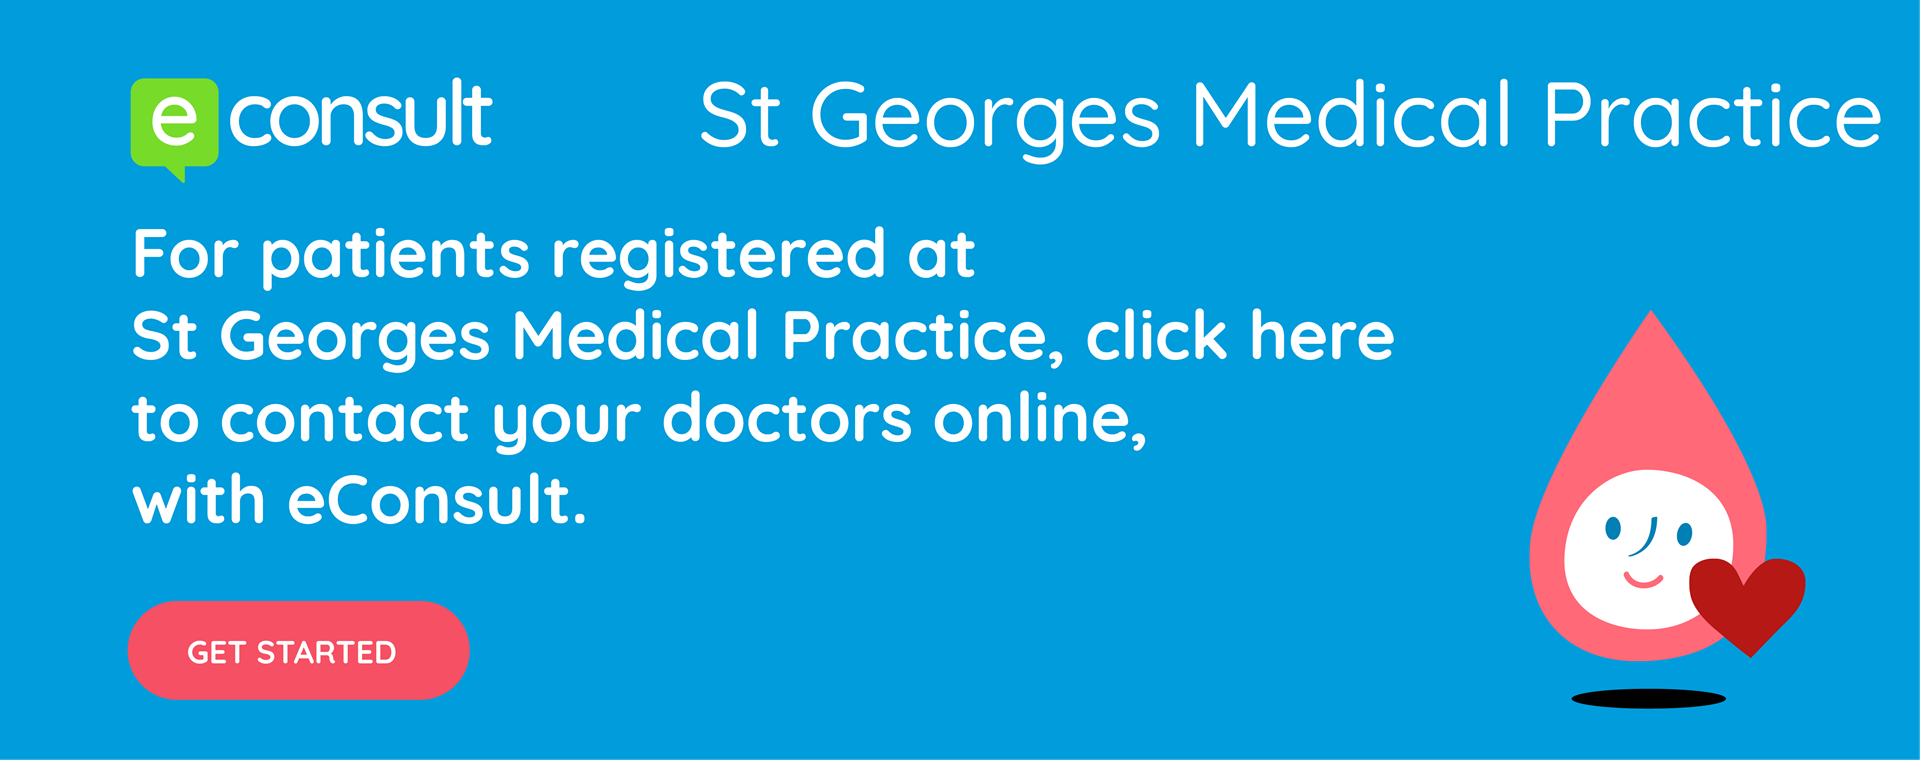 eConsult - St Georges Medical Practice